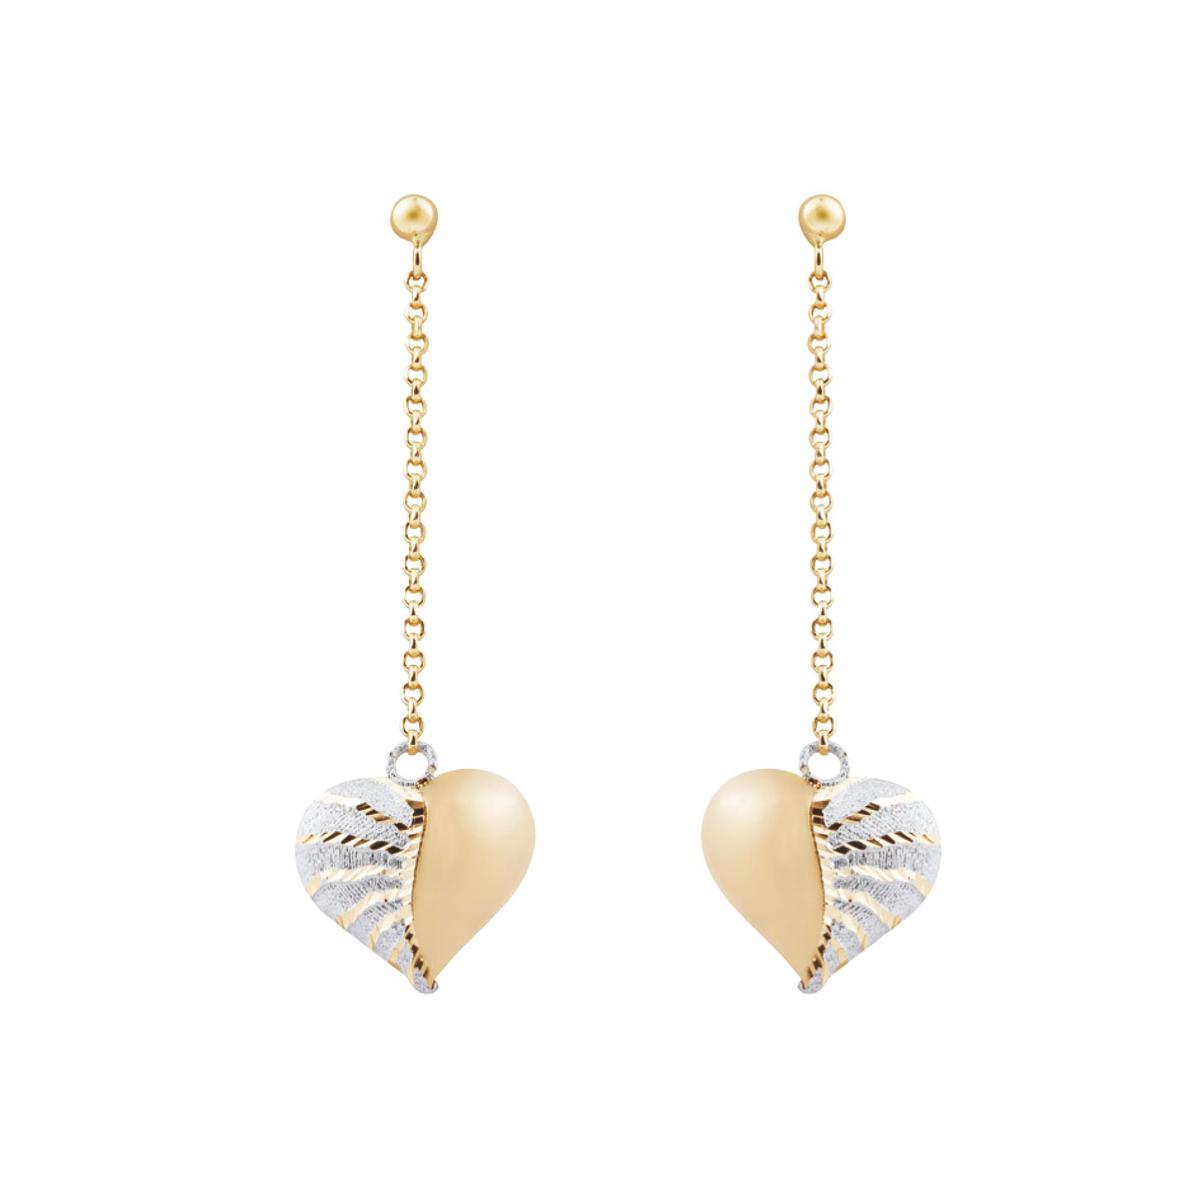 Chain earrings with shiny and satin-finished heart pendant in 18kt gold - OE4086